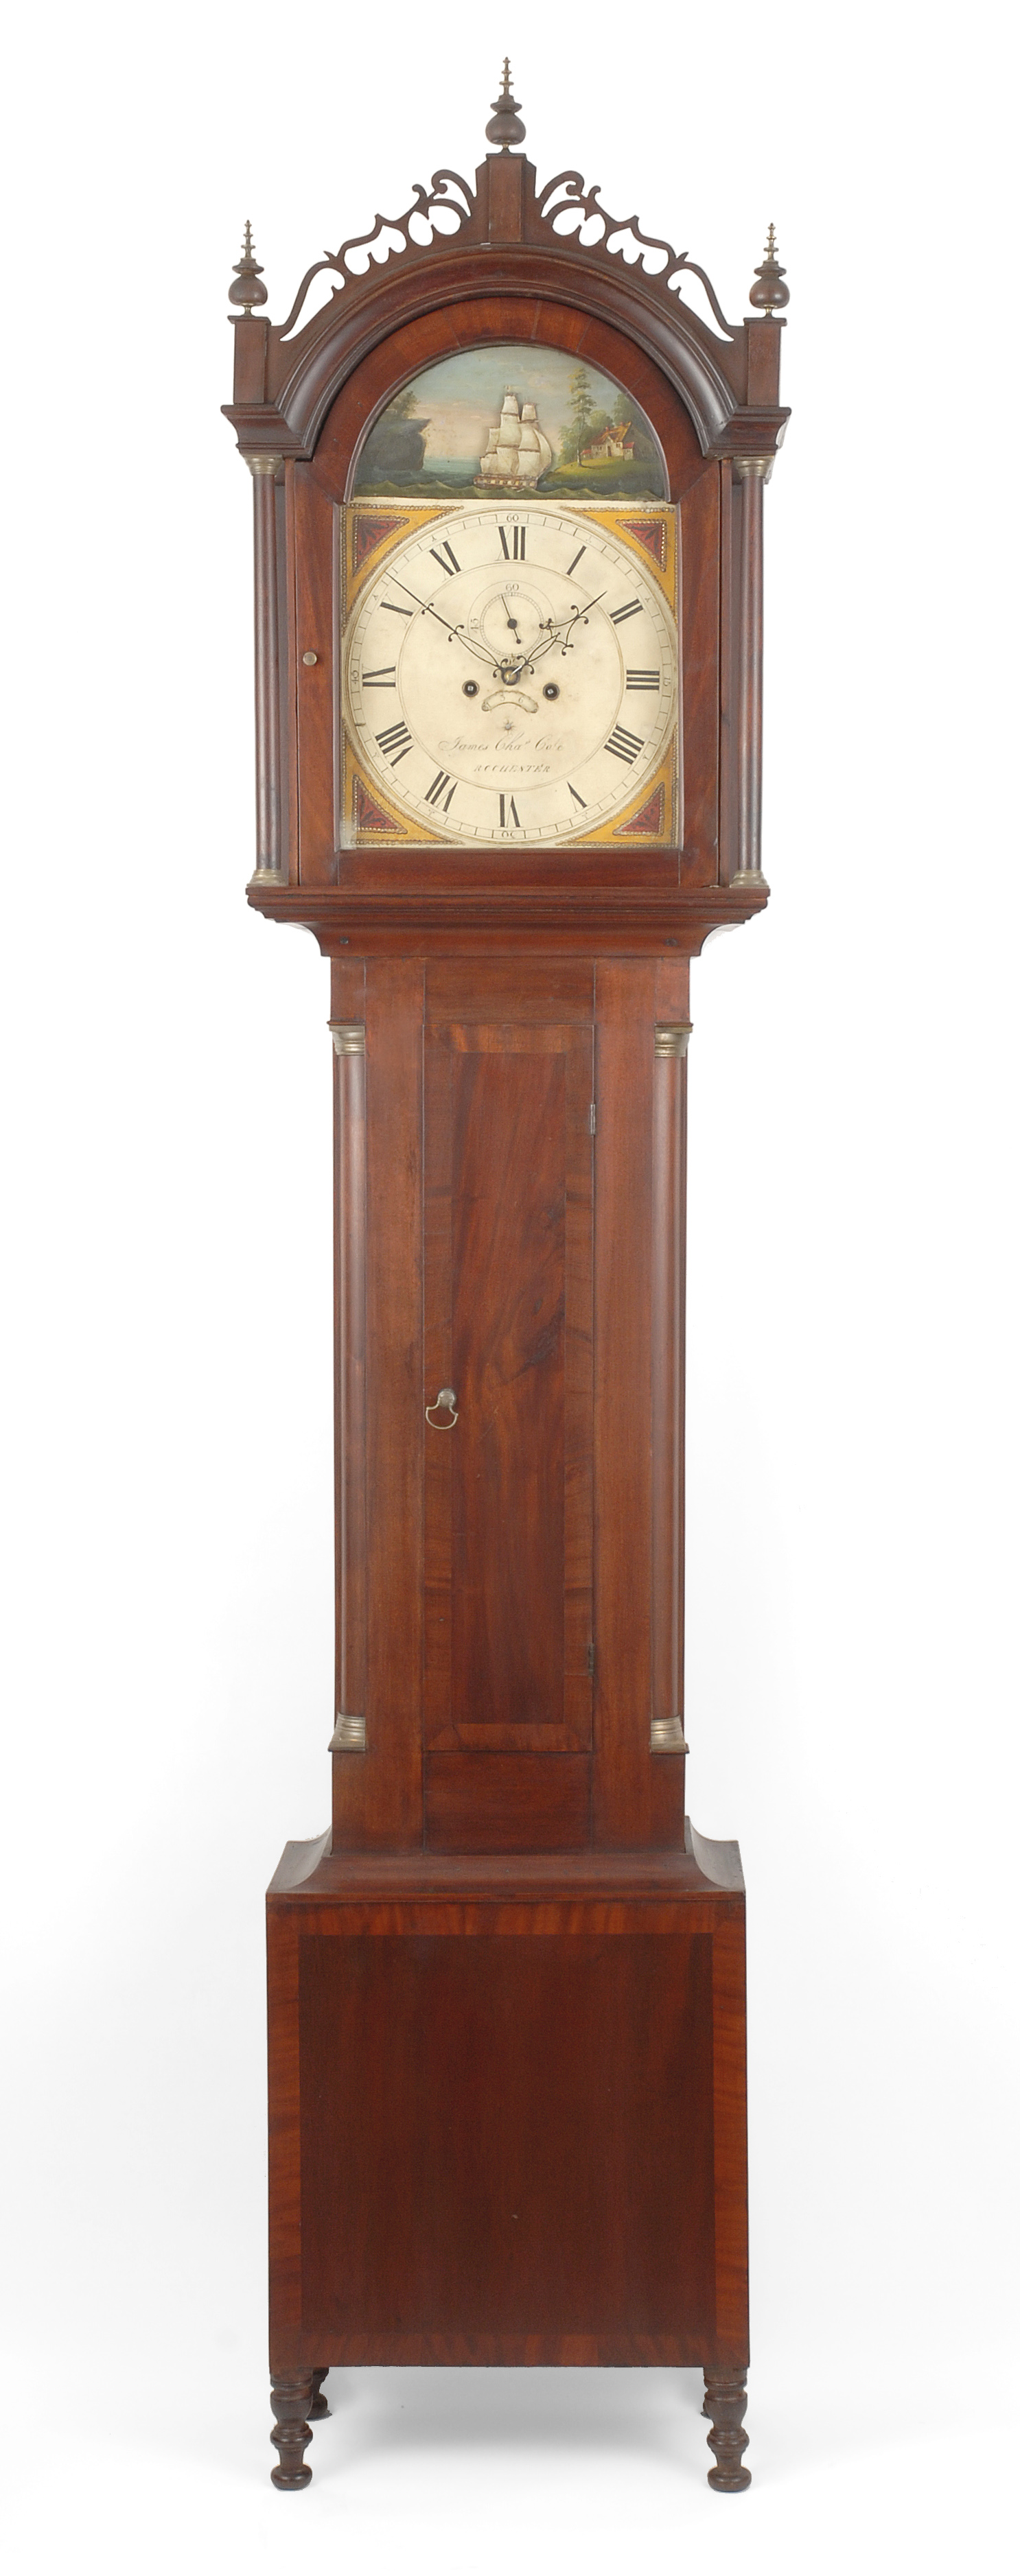 An impressive Federal mahogany tall case clock with rare rocking ship dial by James Cole, Rochester, New Hampshire, circa 1820.